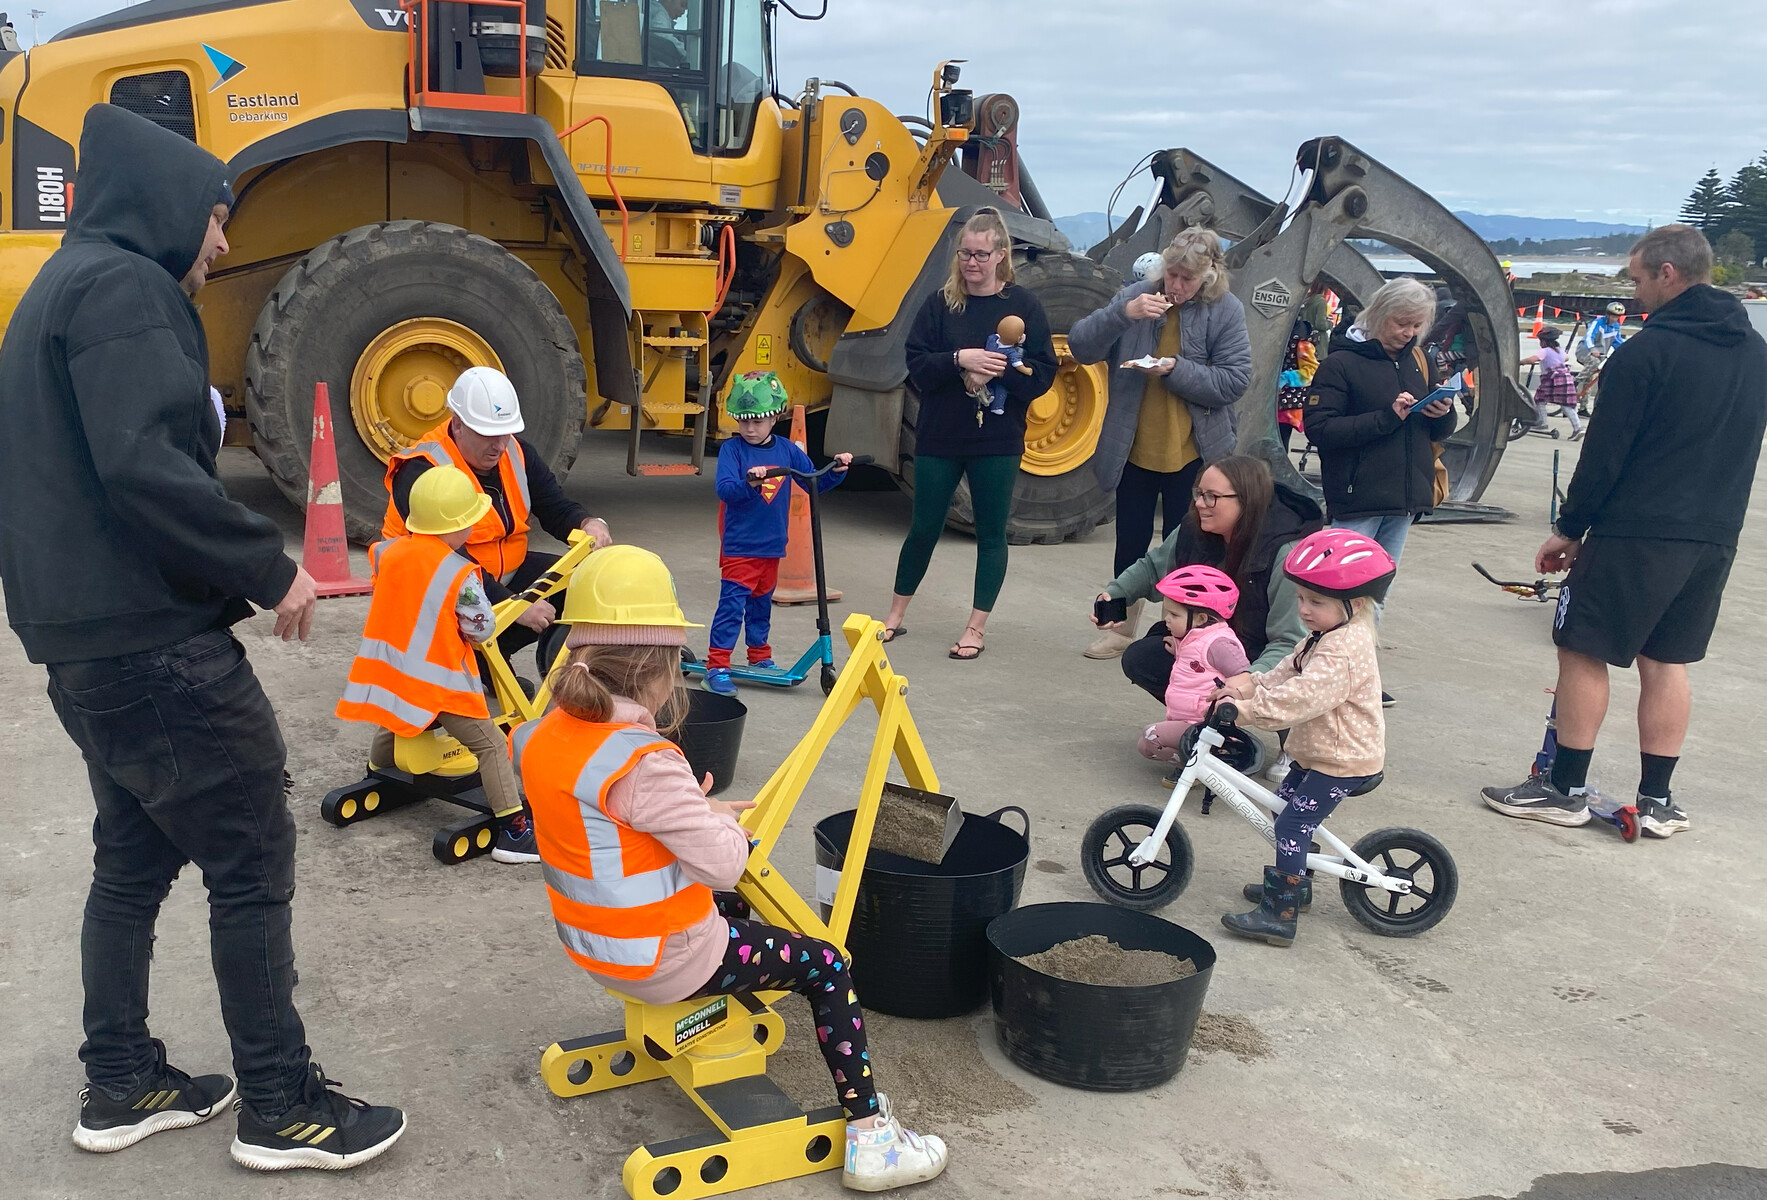 All ages fun with the diggers at the wharf 7 opening